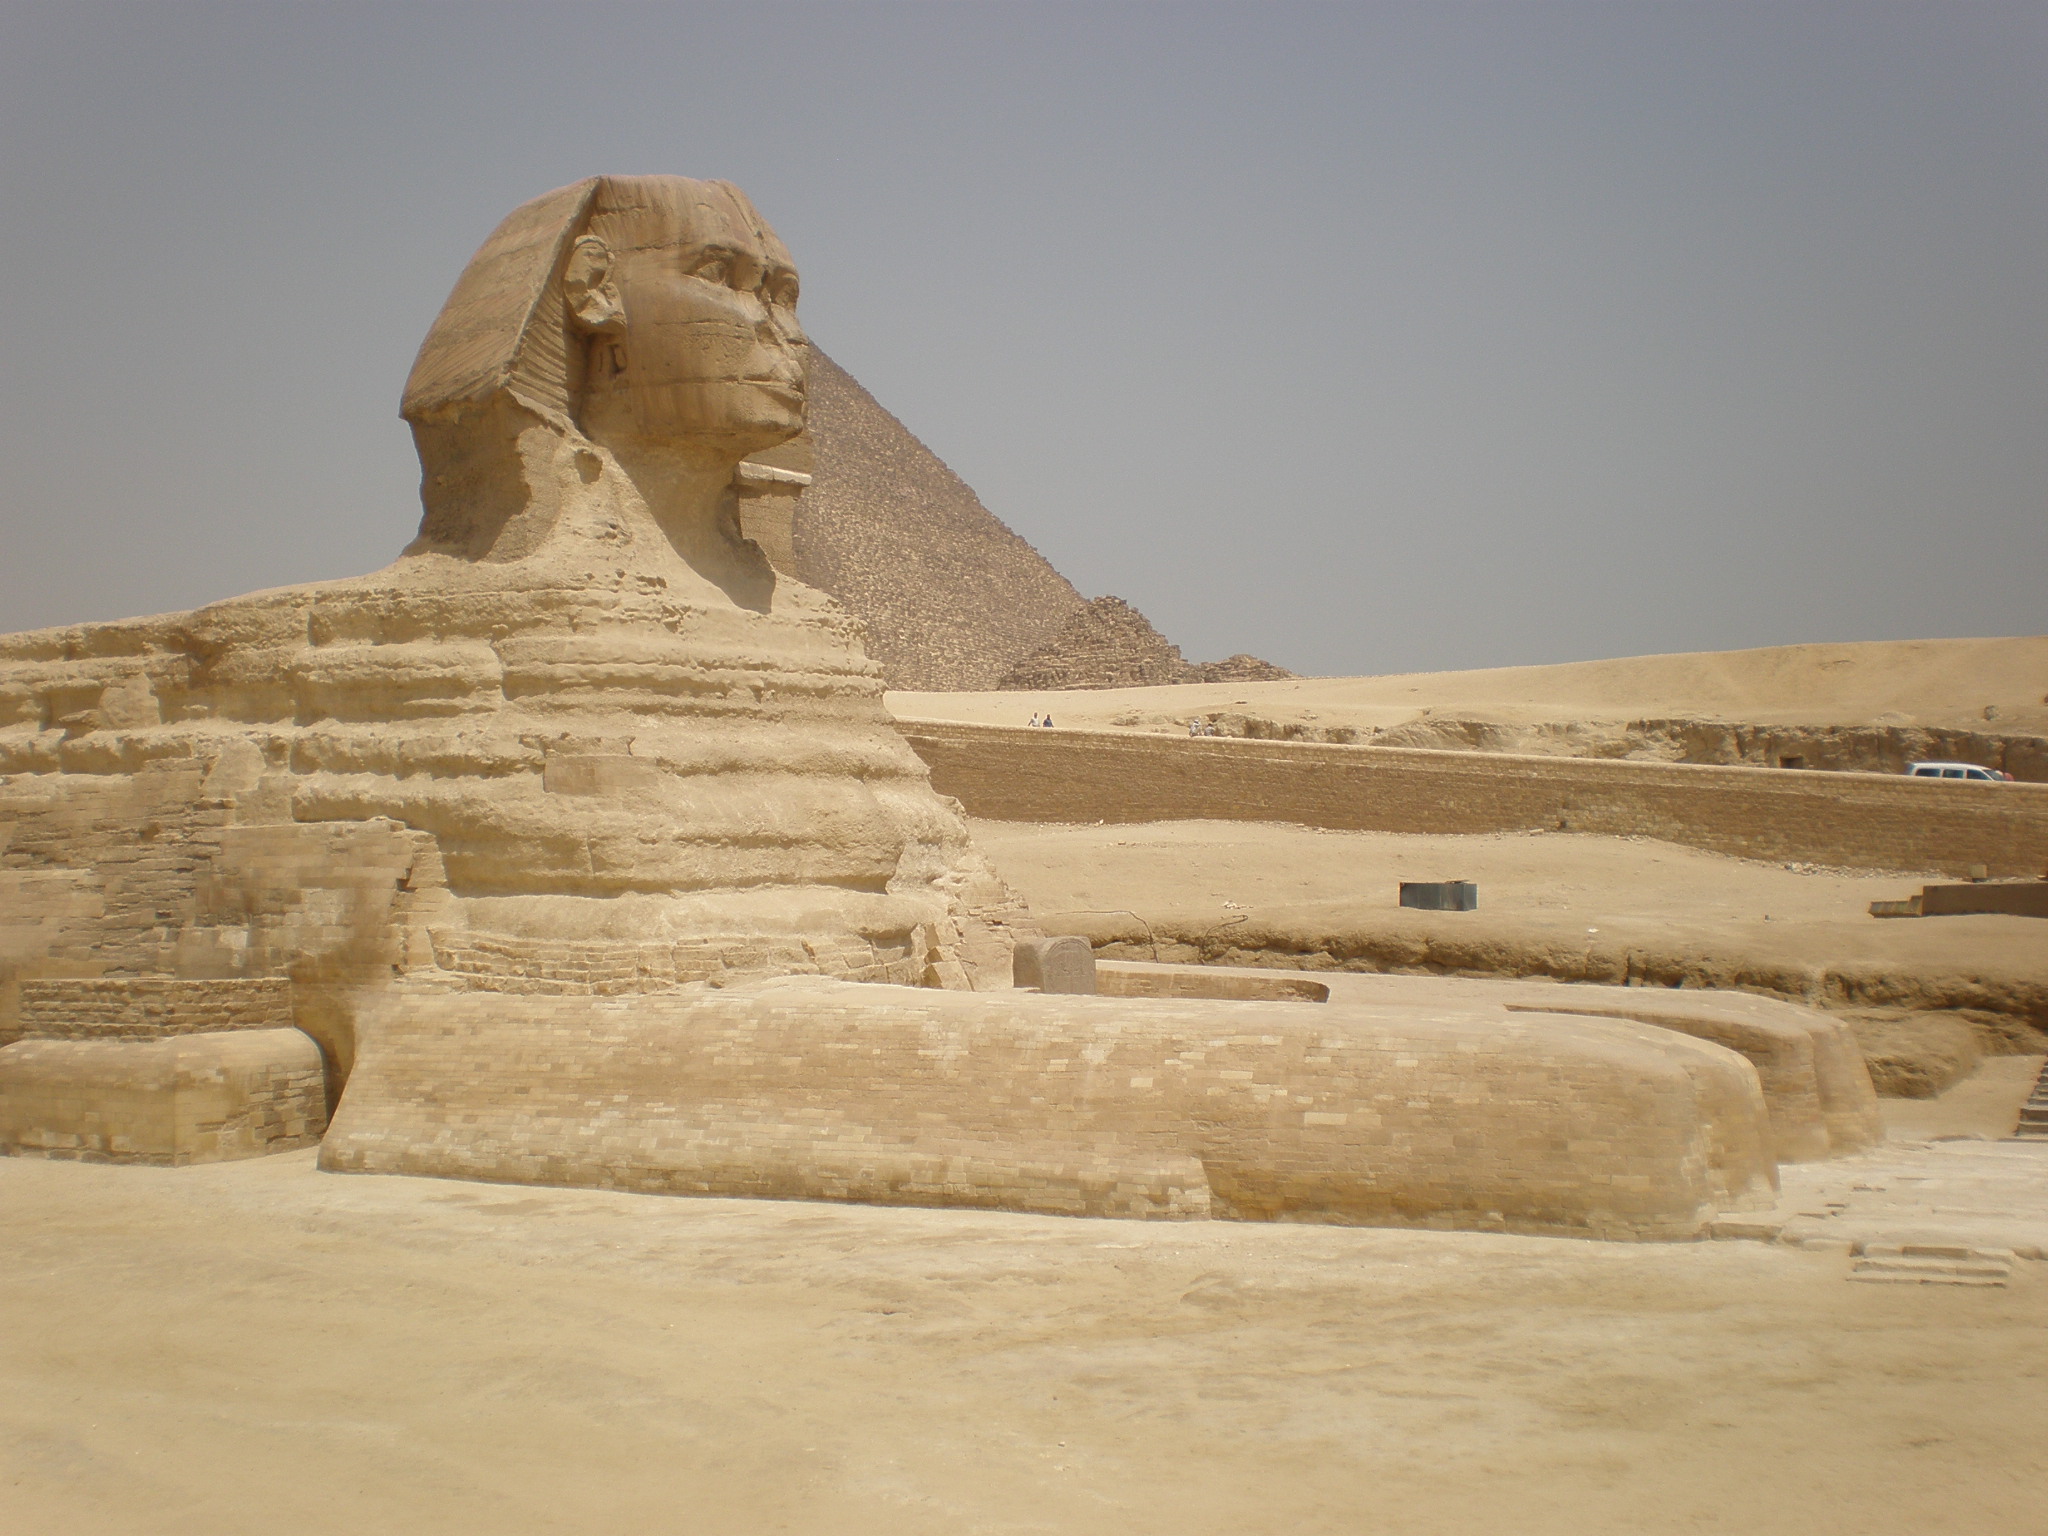 Sphinx in Egypt